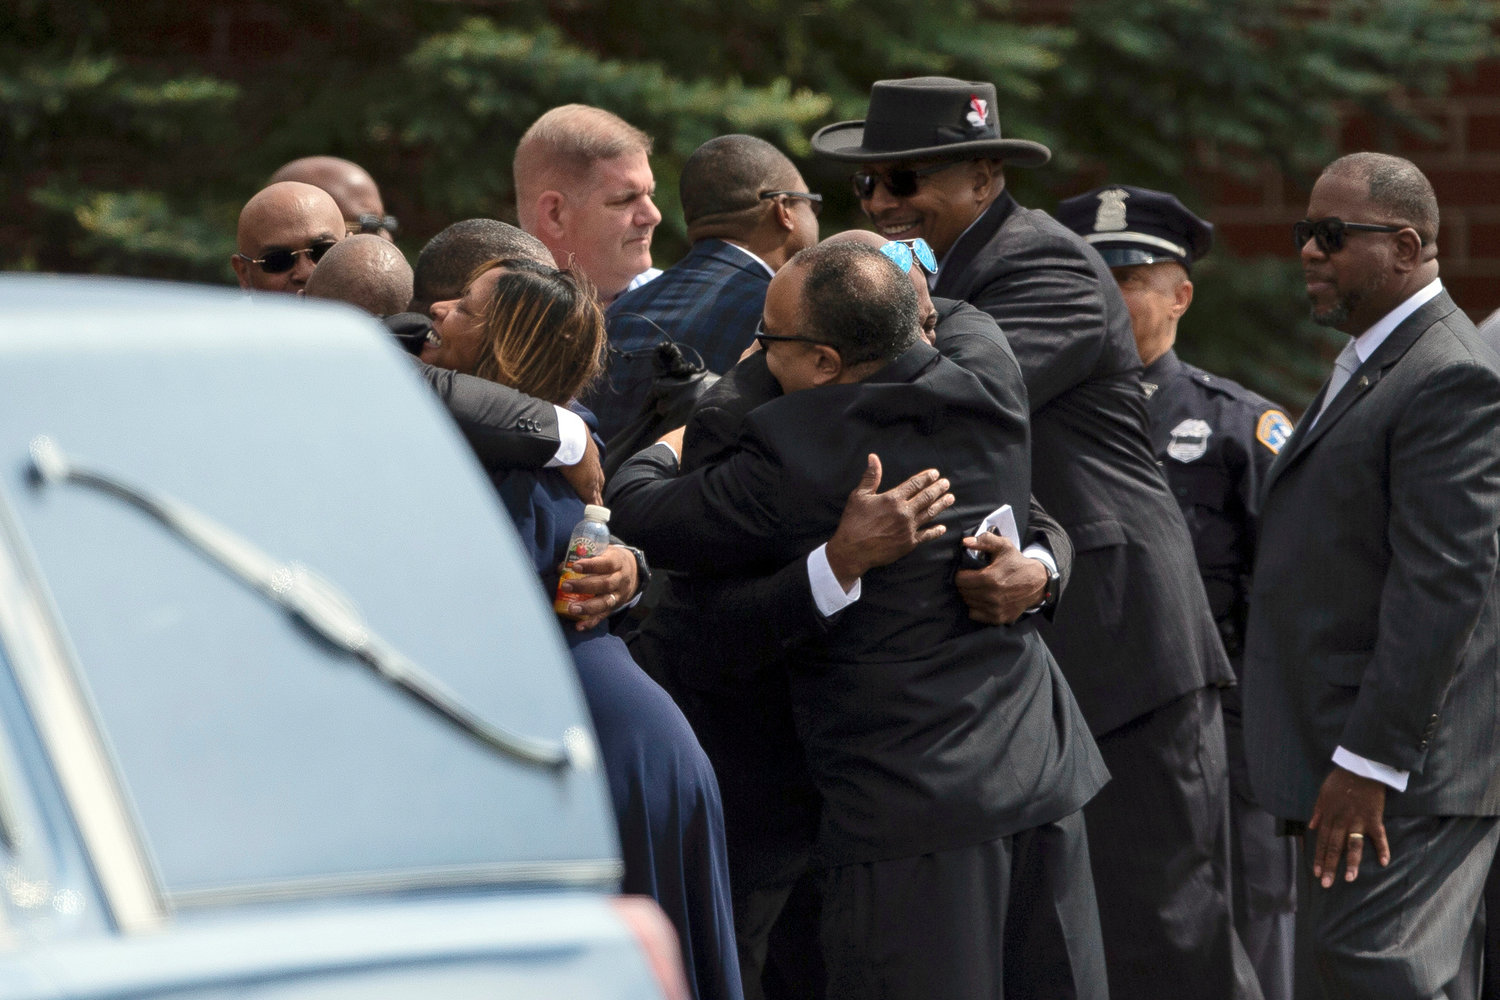 People hug before a funeral service for Aaron Salter Jr. at The Chapel at Crosspoint on Wednesday in Getzville, N.Y. Salter Jr. was killed in the Buffalo supermarket shooting on May 14.